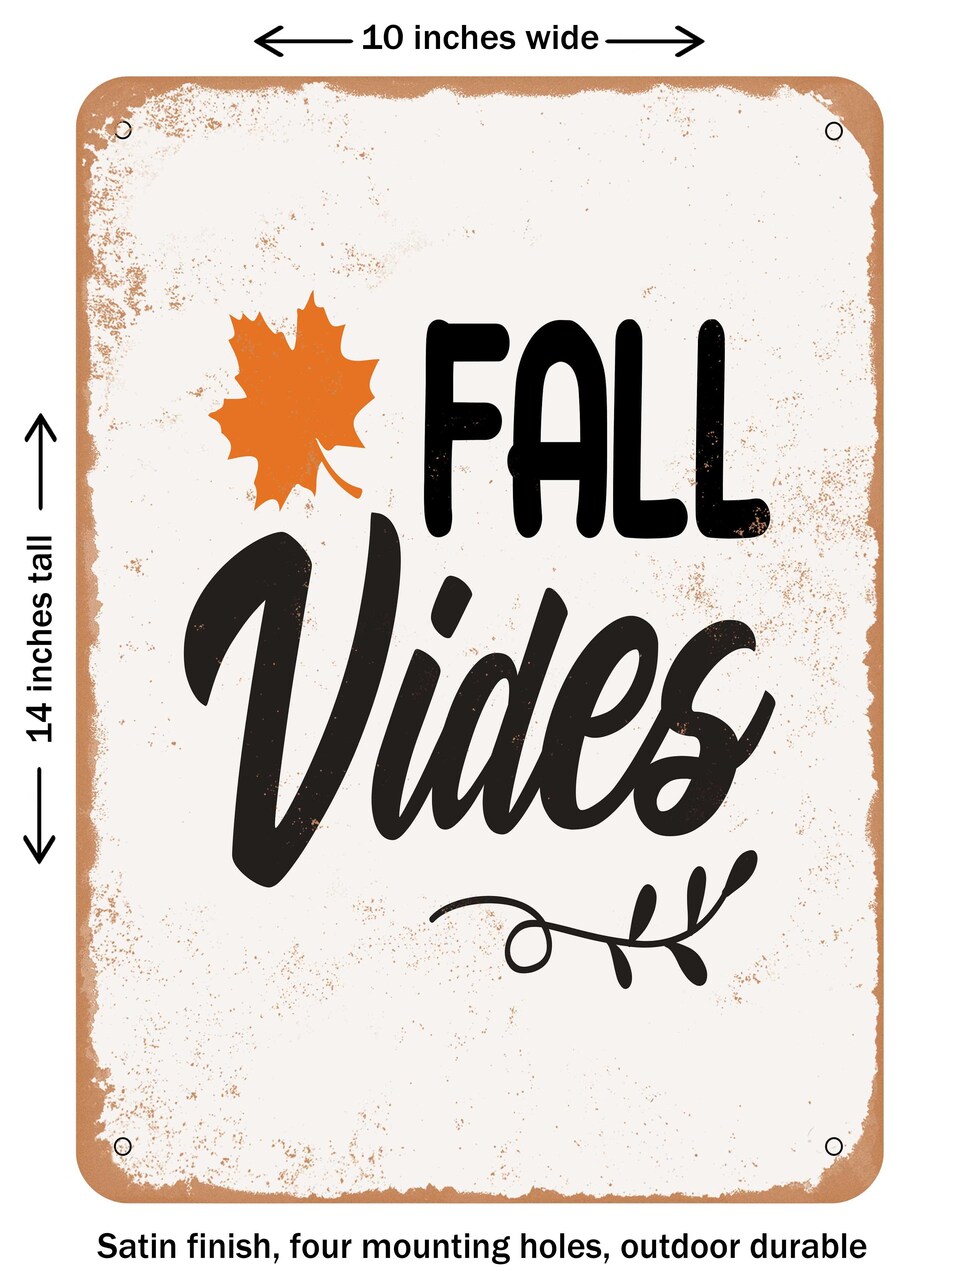 DECORATIVE METAL SIGN - Fall Vides - 2  - Vintage Rusty Look